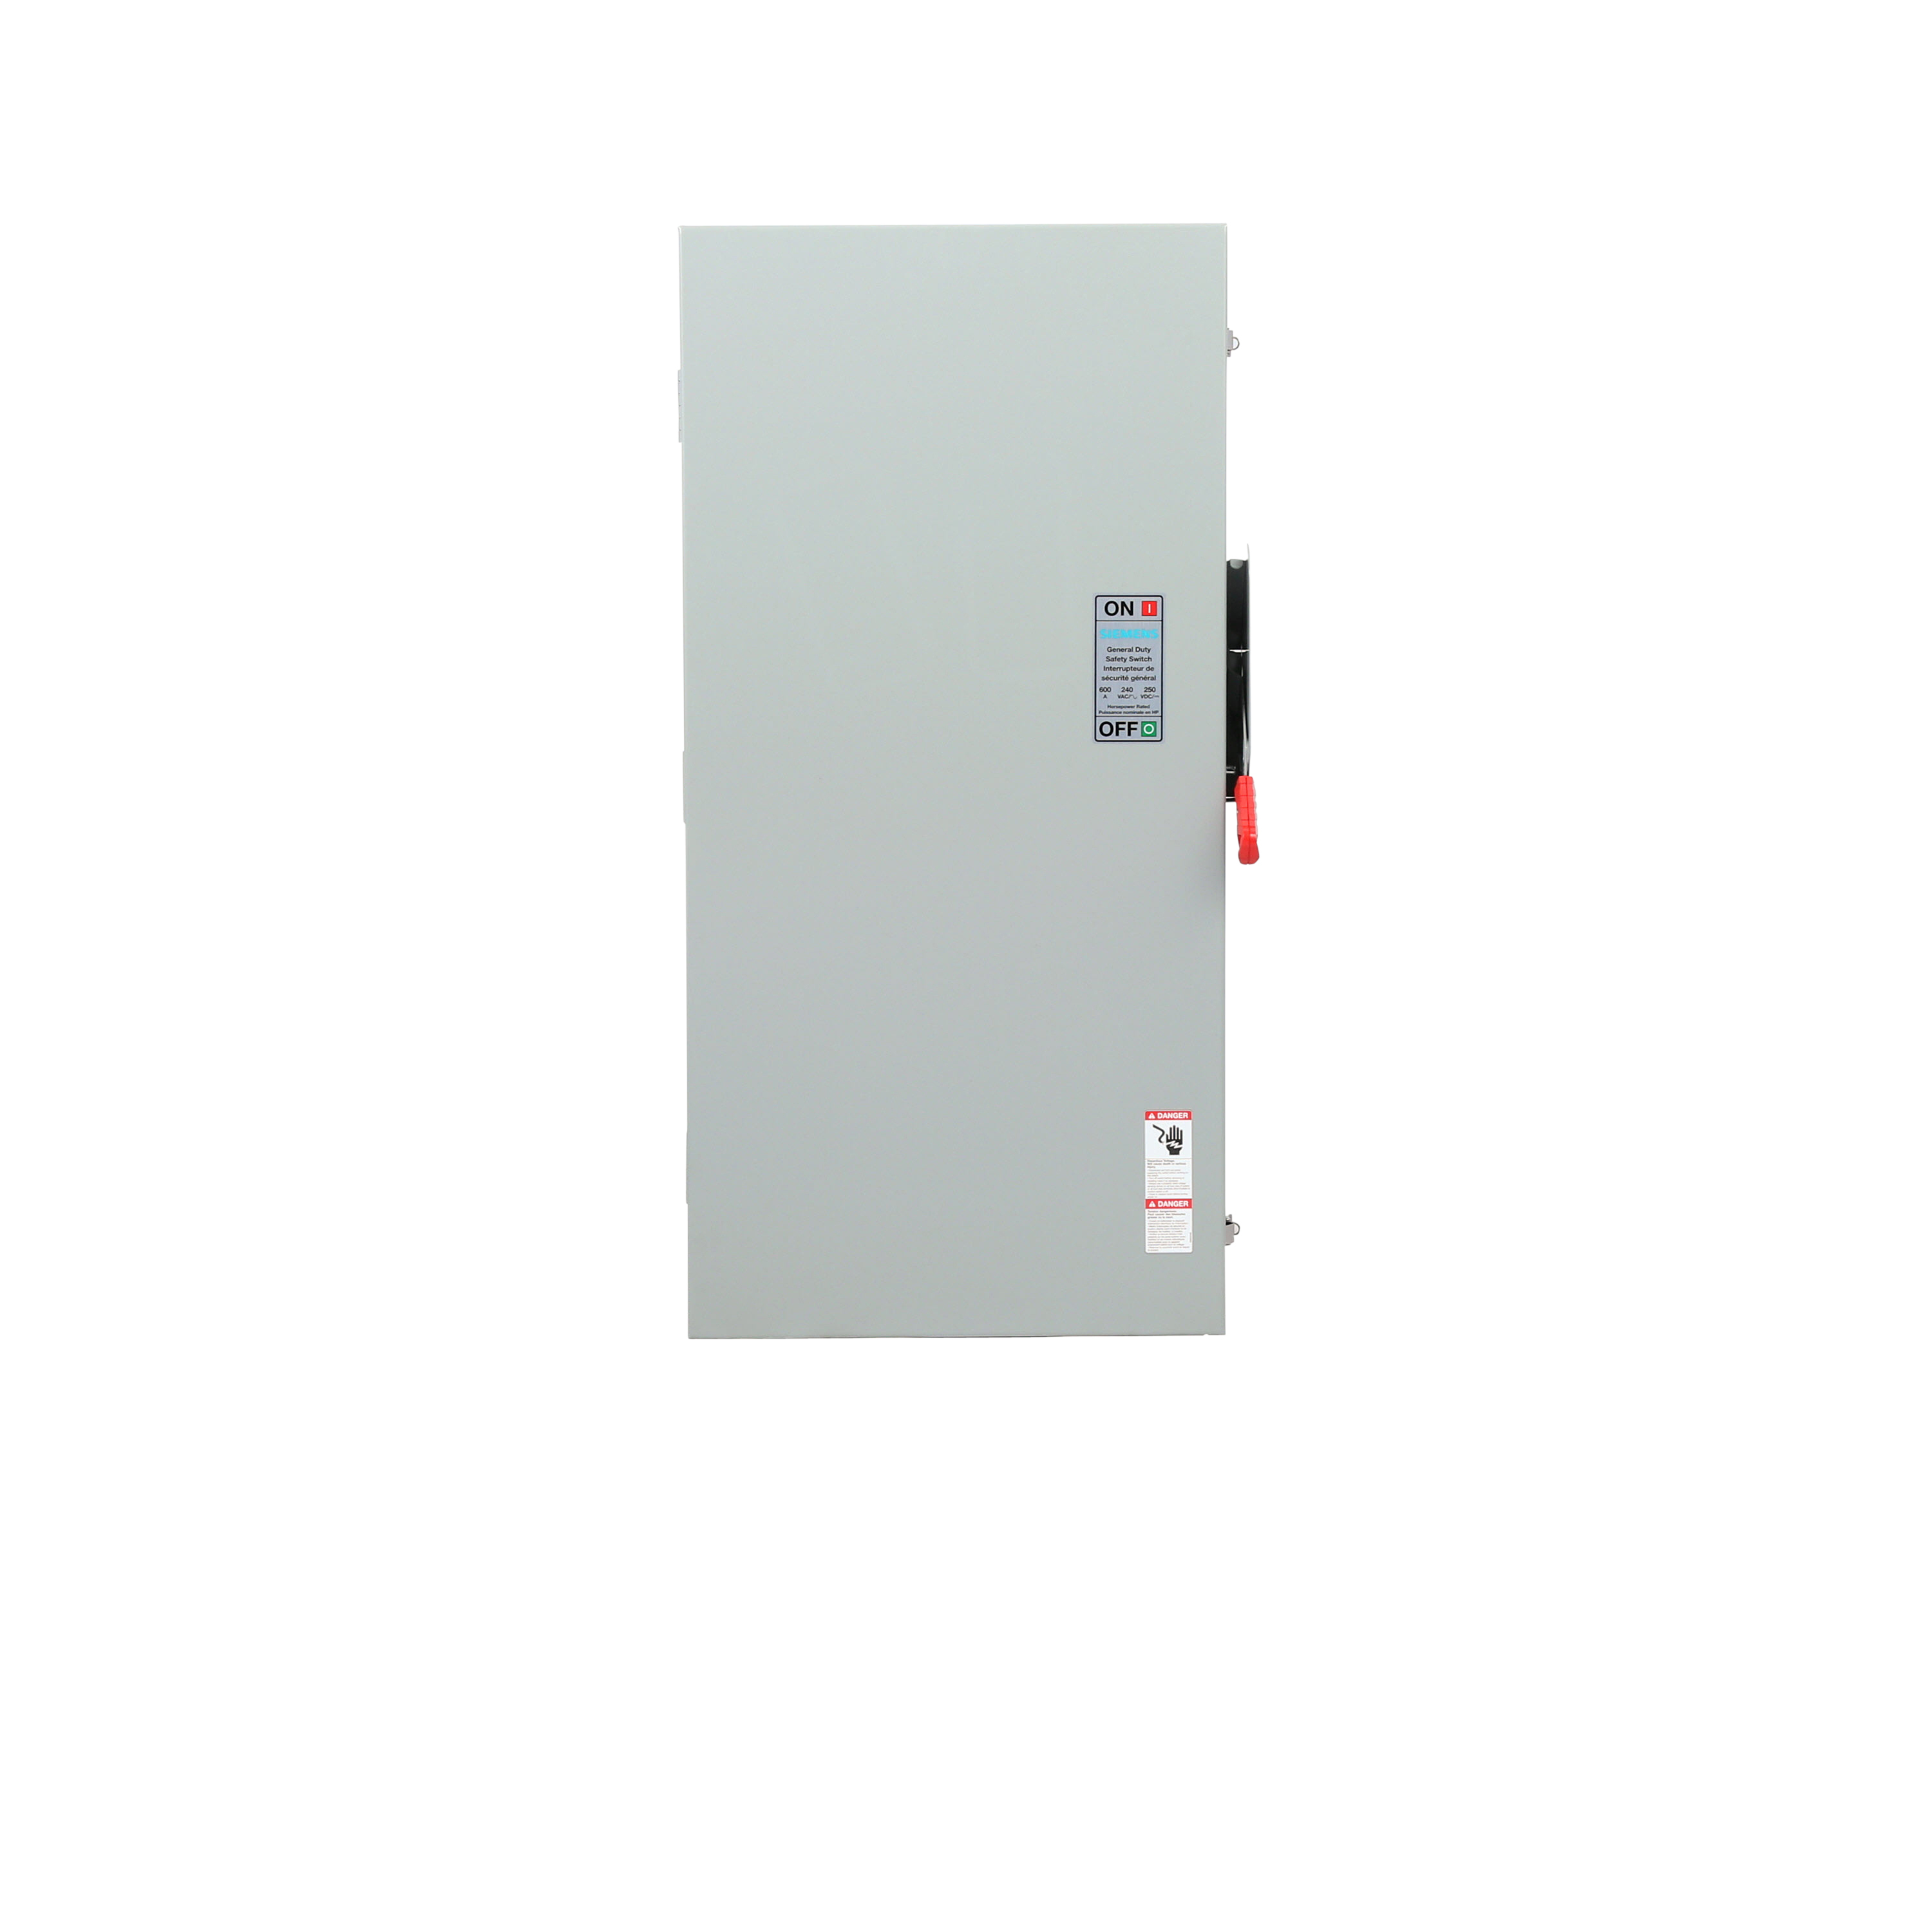 Siemens Low Voltage Circuit Protection General Duty Safety Switch. 2-Pole 2-Fuse and solid neutral Fused in a type 3R enclosure (outdoor). Rated 240VAC (600A).Horse power (Std, Time delay) fused 1-PH 2-W (15, - ), 3-PH 3-W (75, 200). Special features service entrance labeled suitable for 3-PH motor loads.